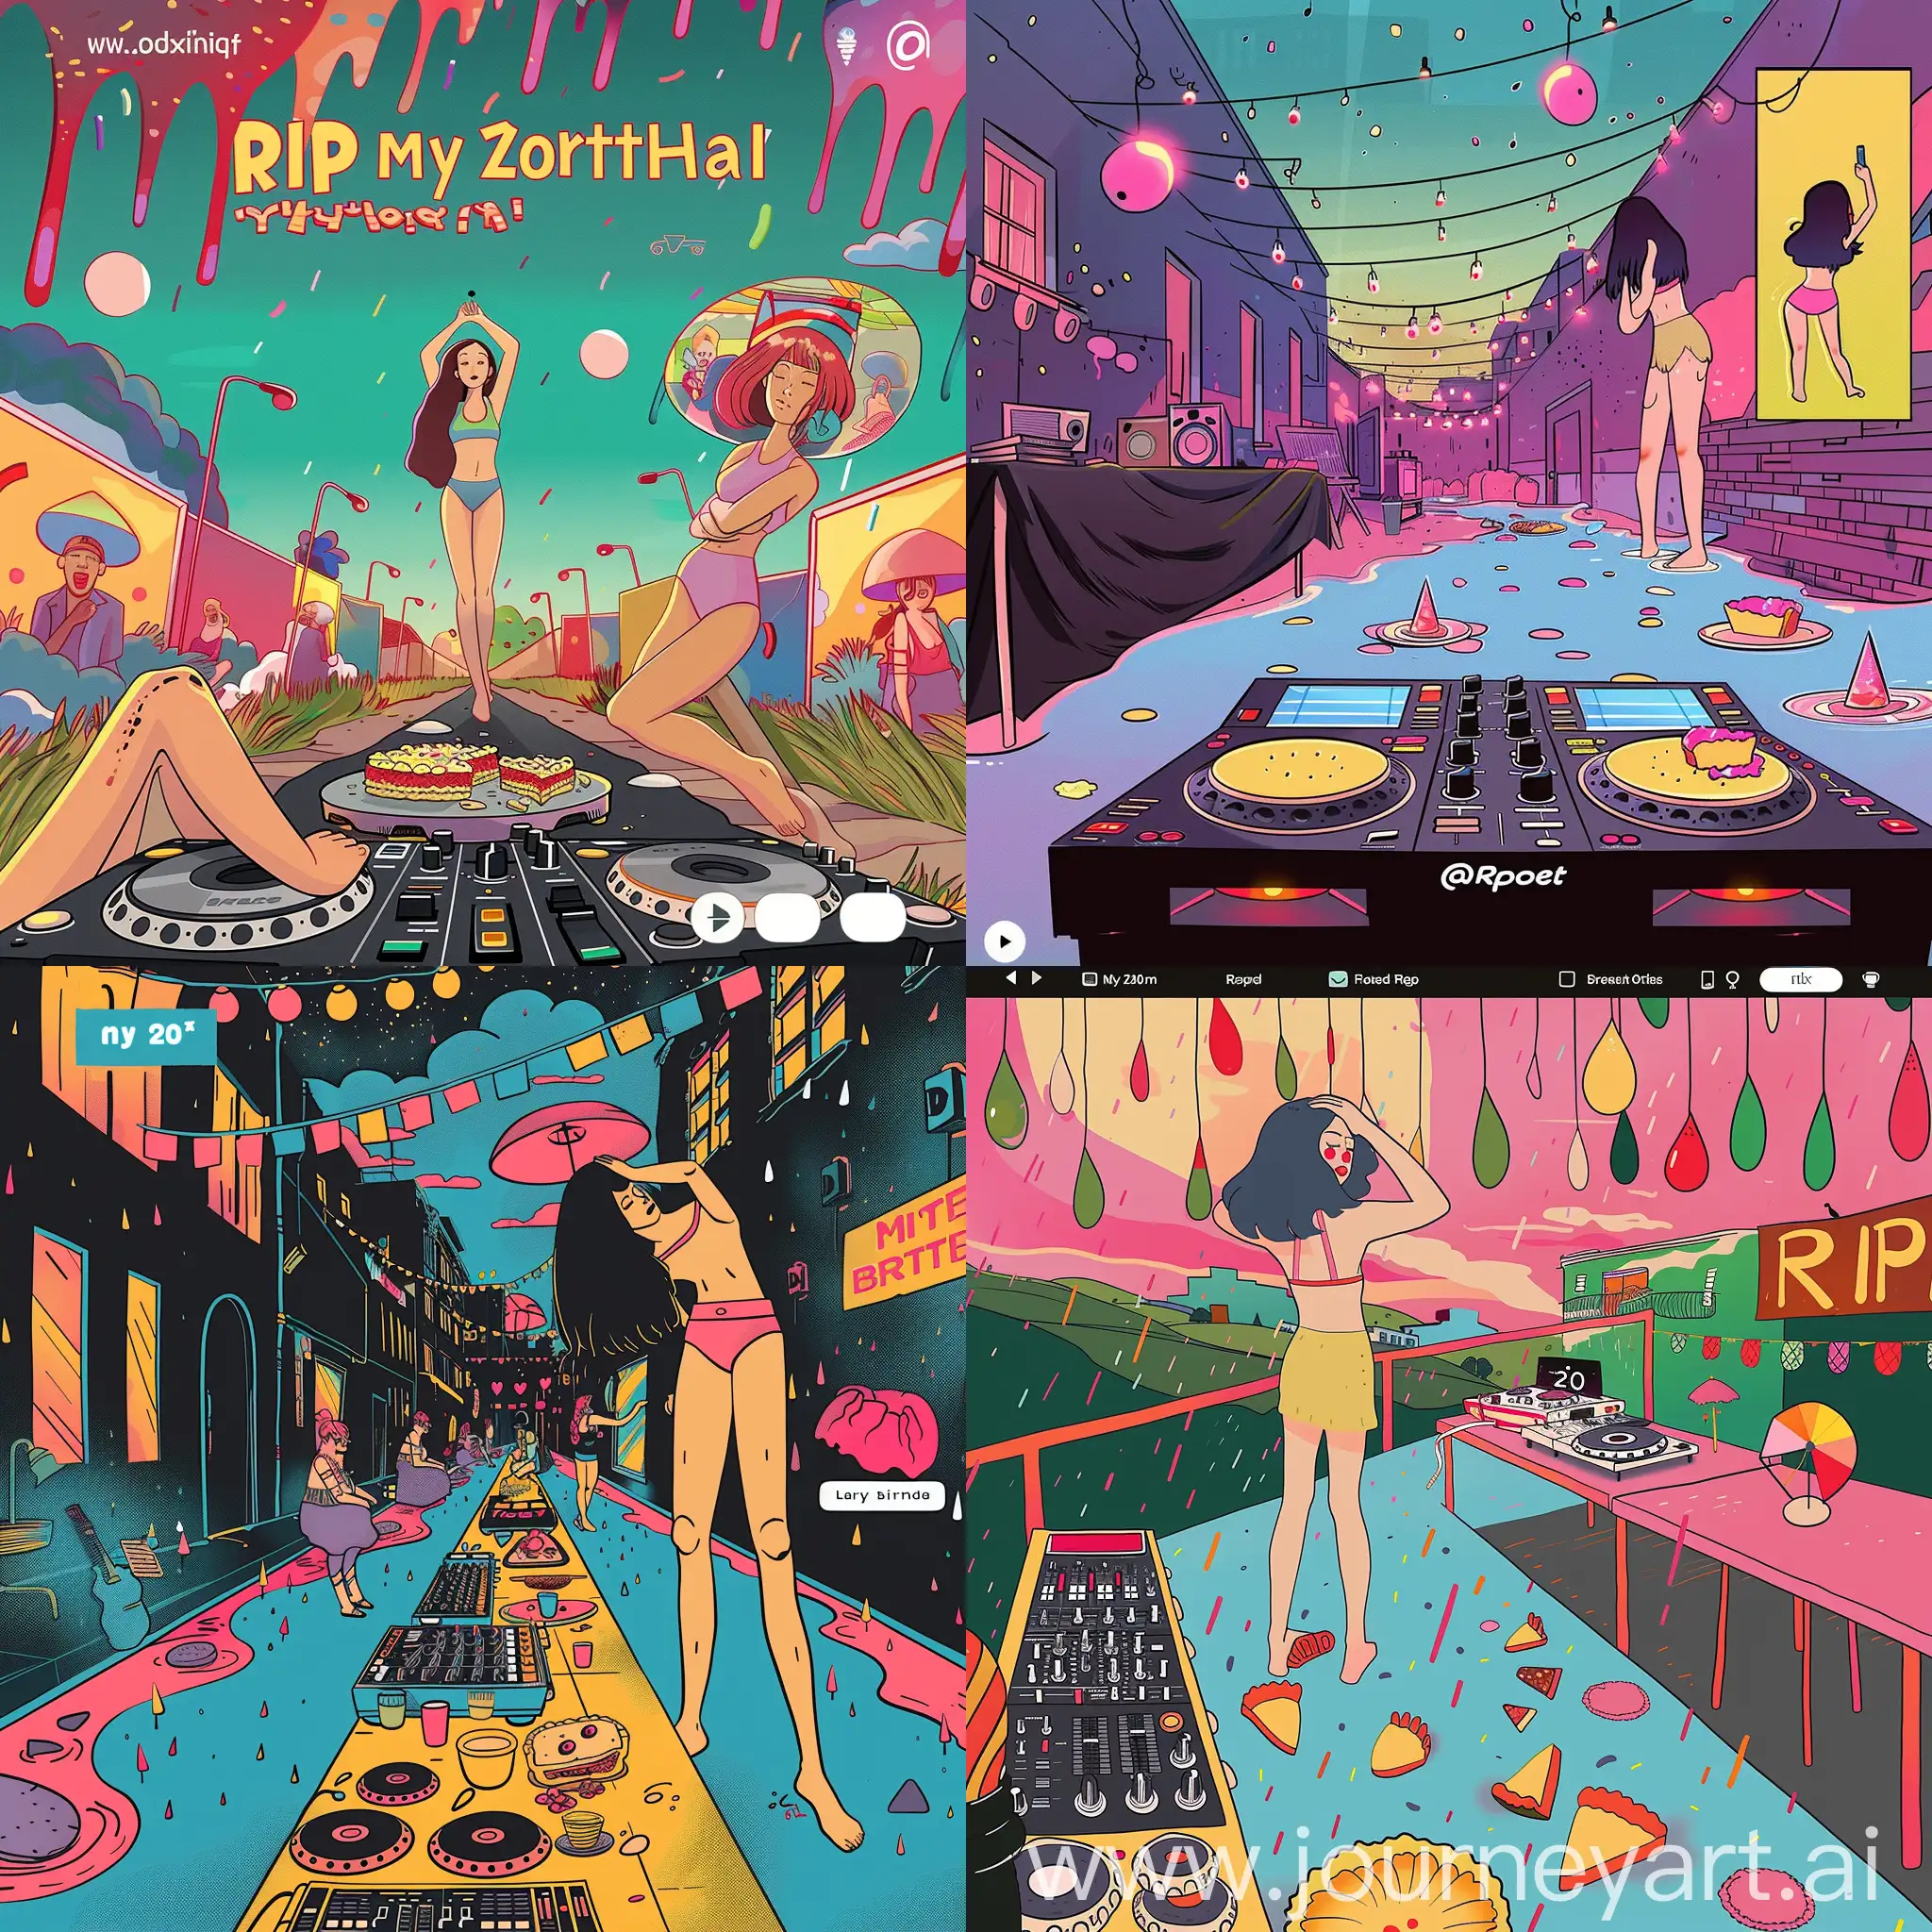 draw a poster in vector for a birthday party. street, summer, on the right there is a long table on it a girl stands on her head and there are pieces of pie on the table, on the left there is a table with a DJ console and speakers, the table is decorated with decorative rain. in the upper right corner there is a phrase written rip my 20th birthday is the name of the party.